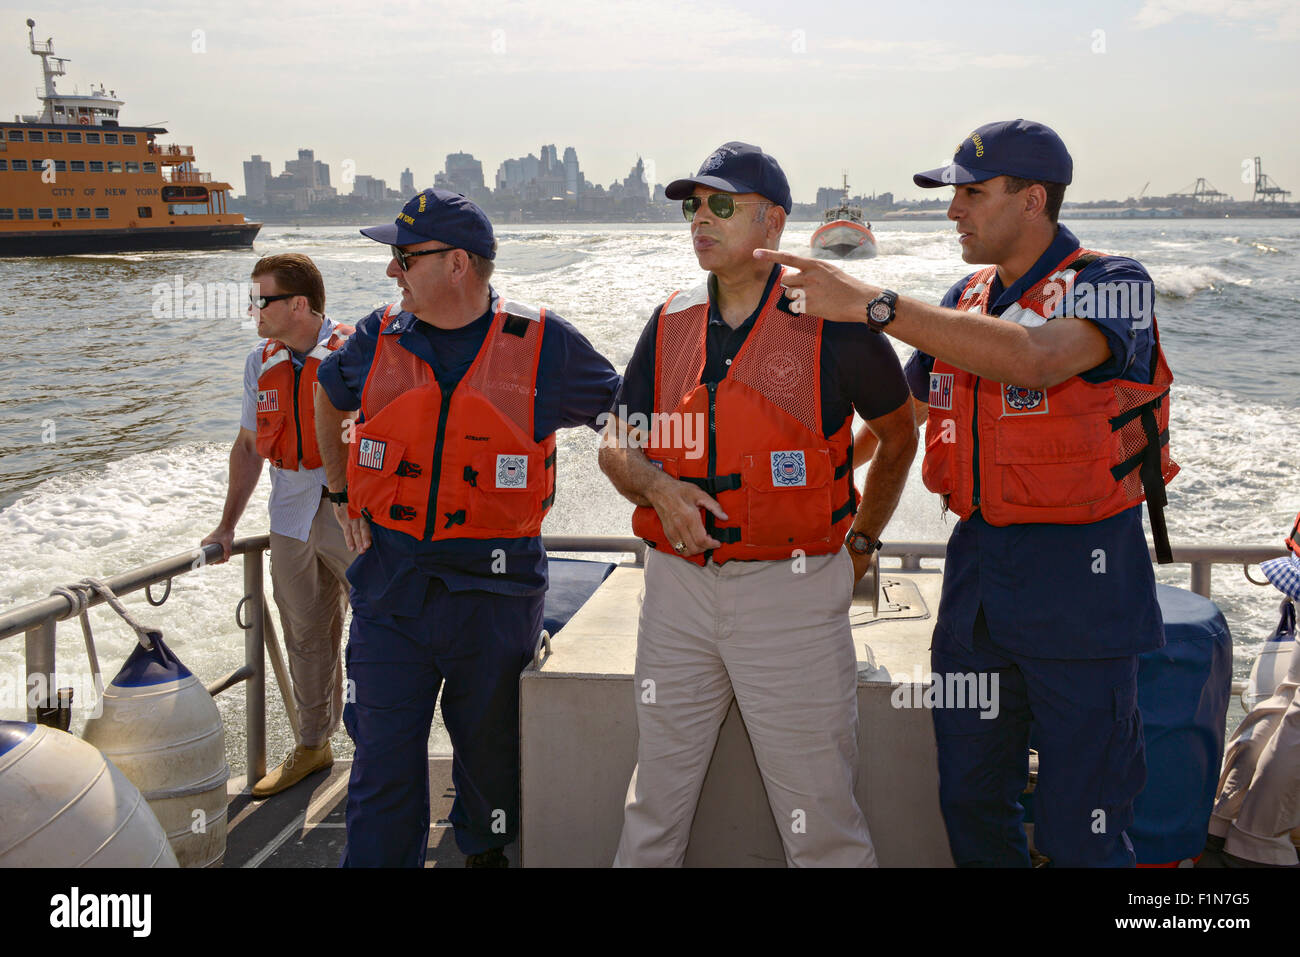 Jeh Johnson Jr., right, talks to his father U.S. Secretary of Homeland Security Jeh Johnson, center, along with Capt. Michael Day, Commander Coast Guard Sector New York, left, during a tour of New York Harbor aboard a Coast Guard 45-foot Response Boat August 18, 2015 in New York City, NY. Stock Photo